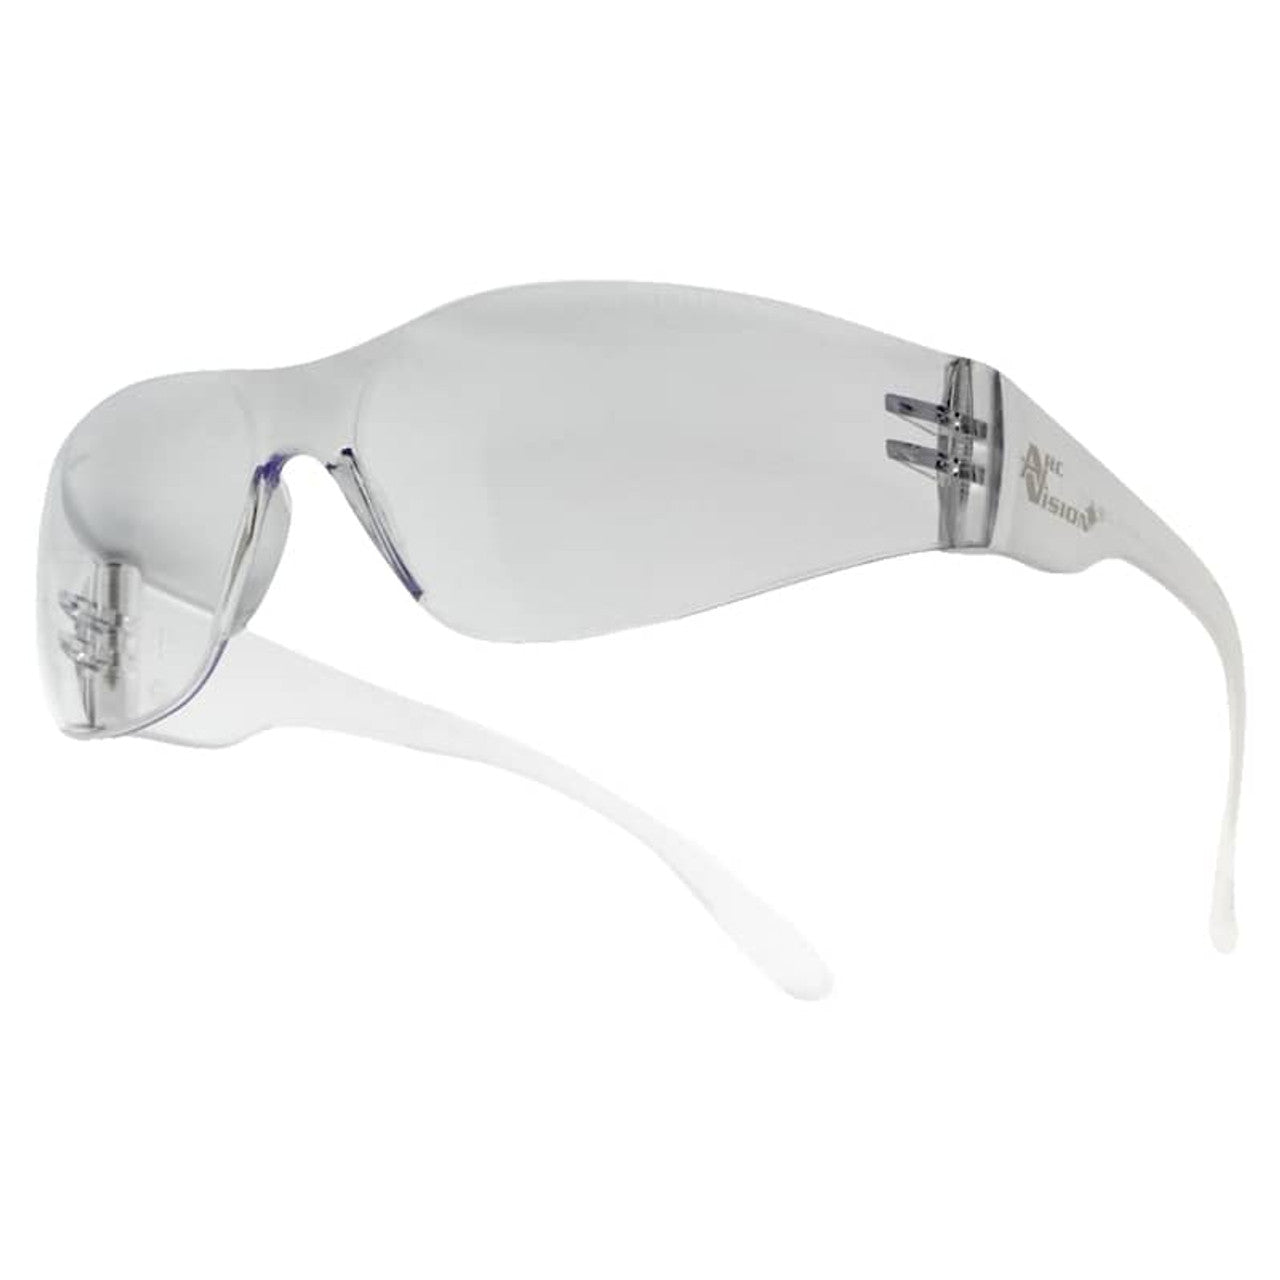 Arc Vision Hammer Clear Safety Glasses Box of 12